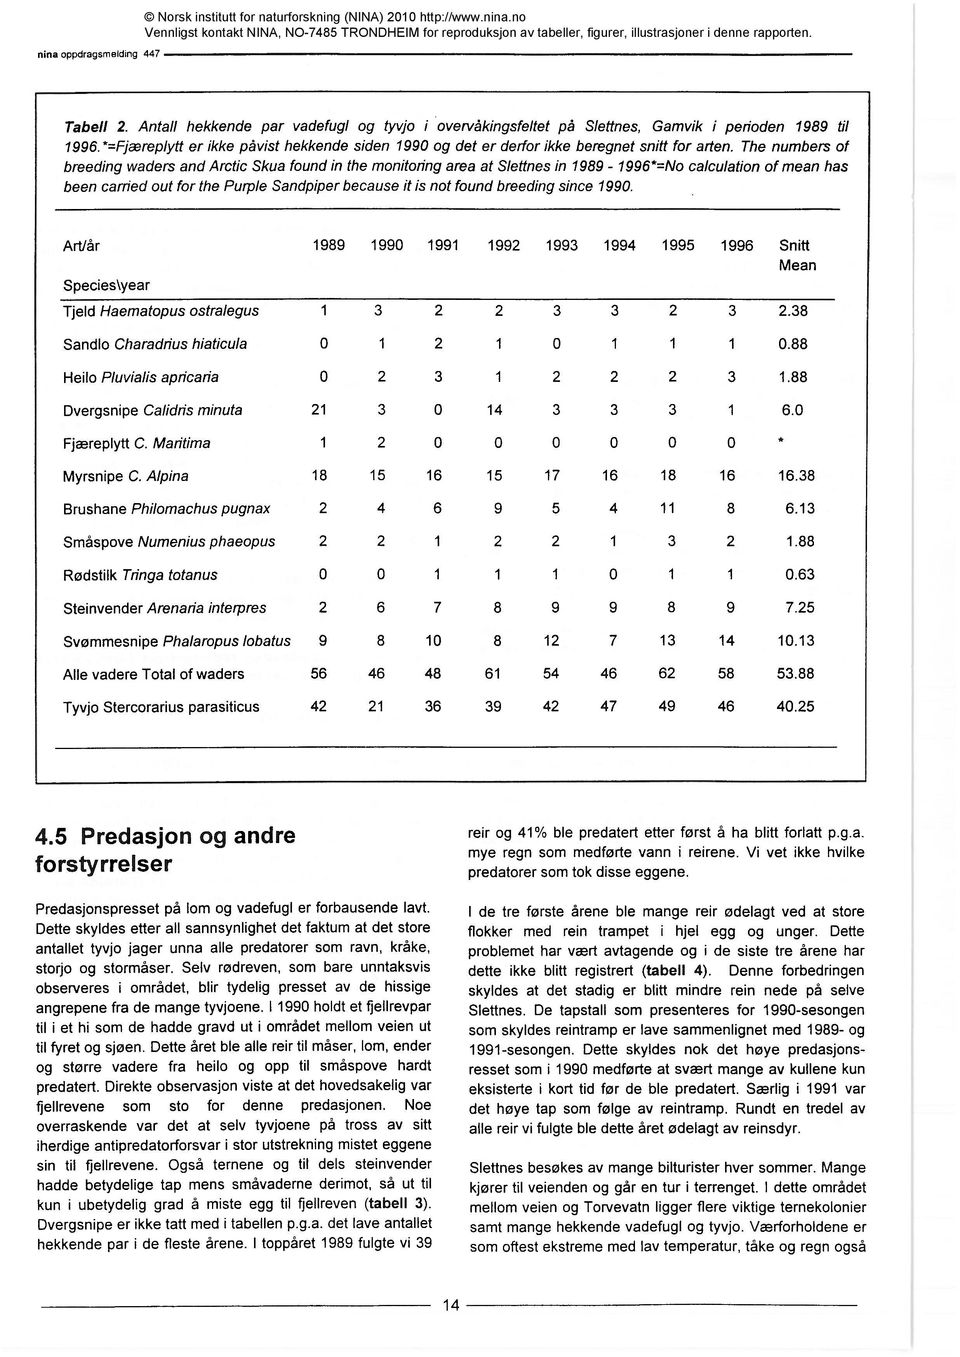 The numbers of breeding waders and Arctic Skua found in the monitoring area at Slettnes in 1989-1996*=No calculation of mean has been carried out for the Purple Sandpiper because it is not found